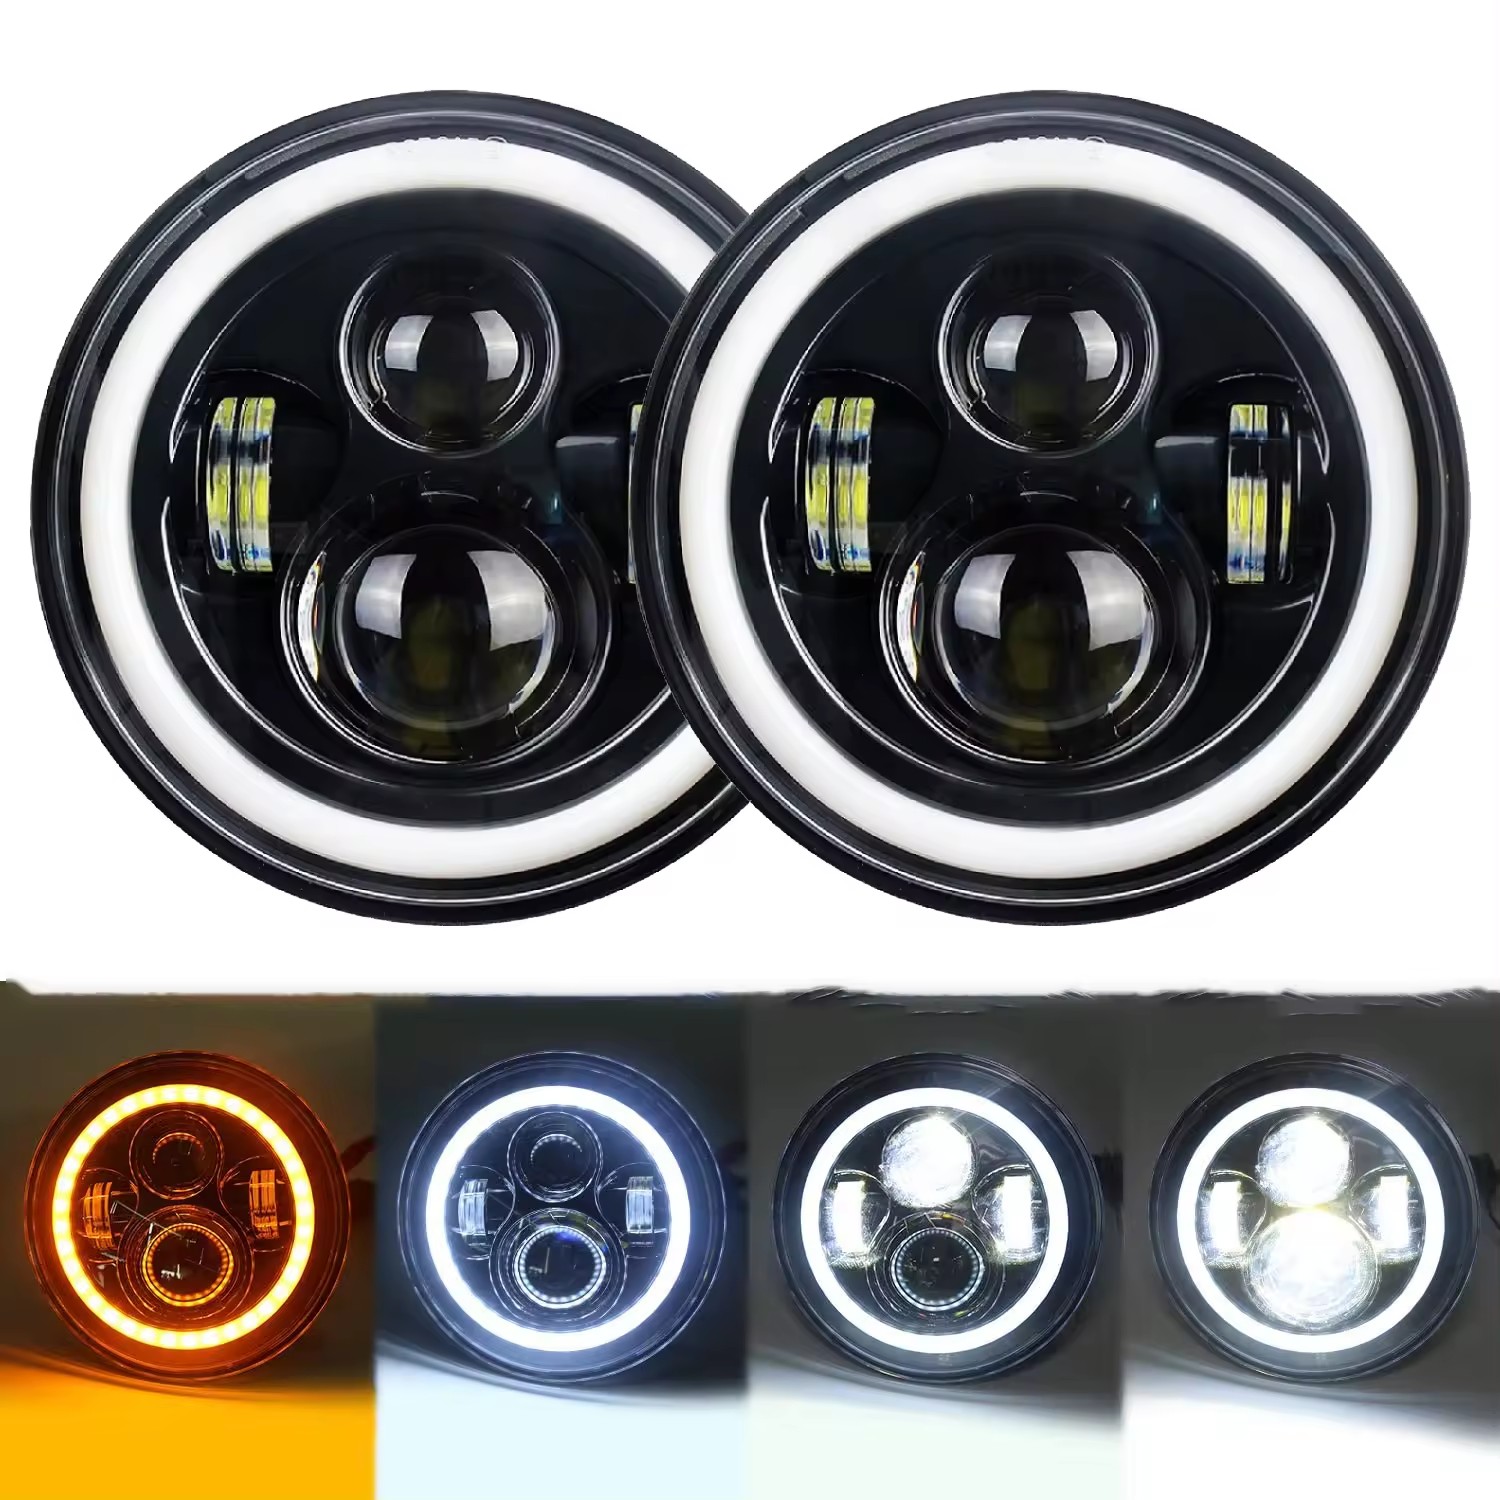 7 Inch Led Round Headlight With Angel Eyes Defender Led Farol For Jeep Troller Fusca Beetle Kombi